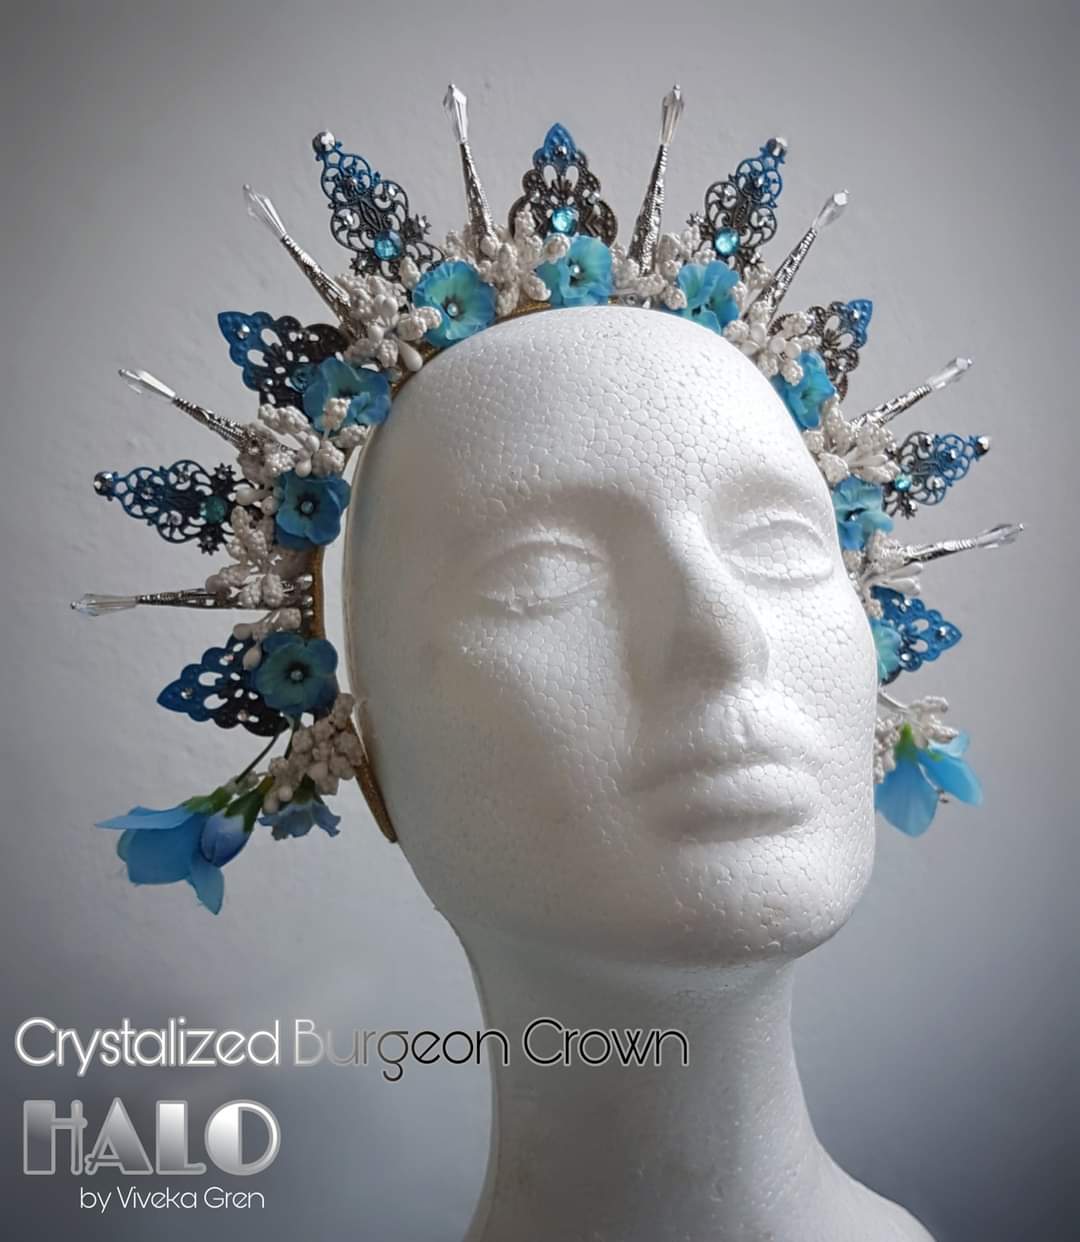 The Crystalized Burgeon flower crown